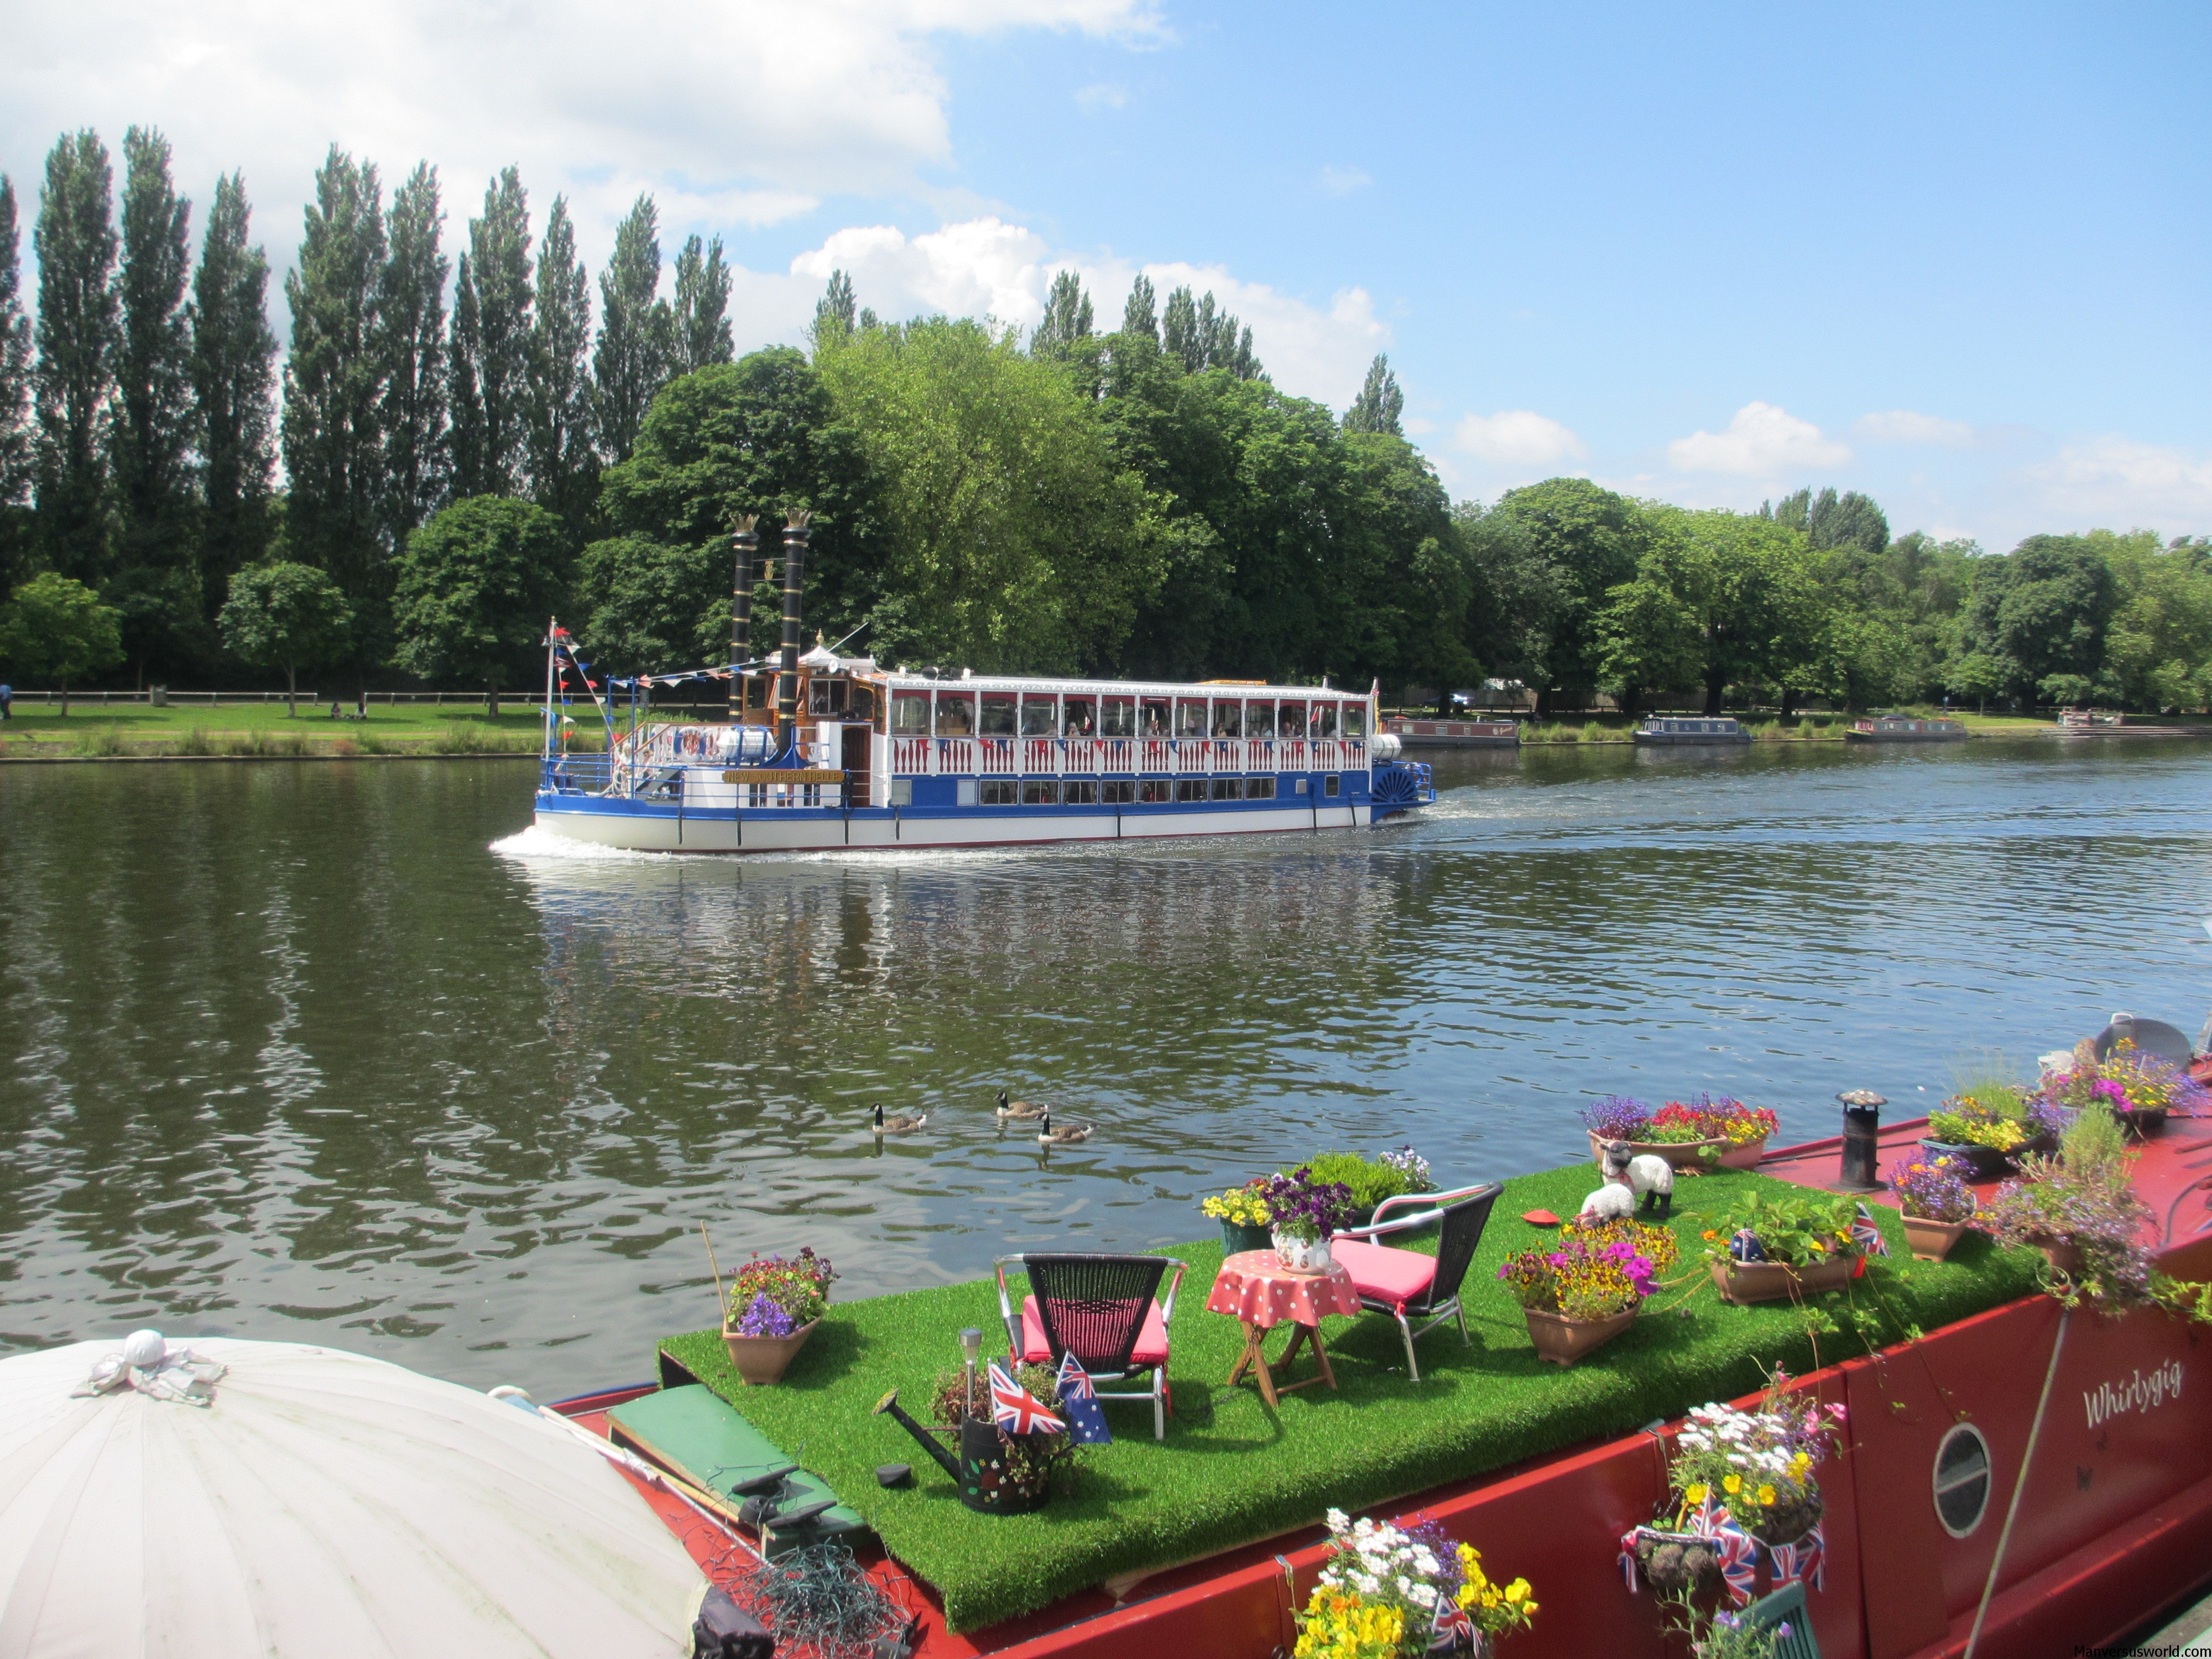 A river boat in Kingston upon Thames in London